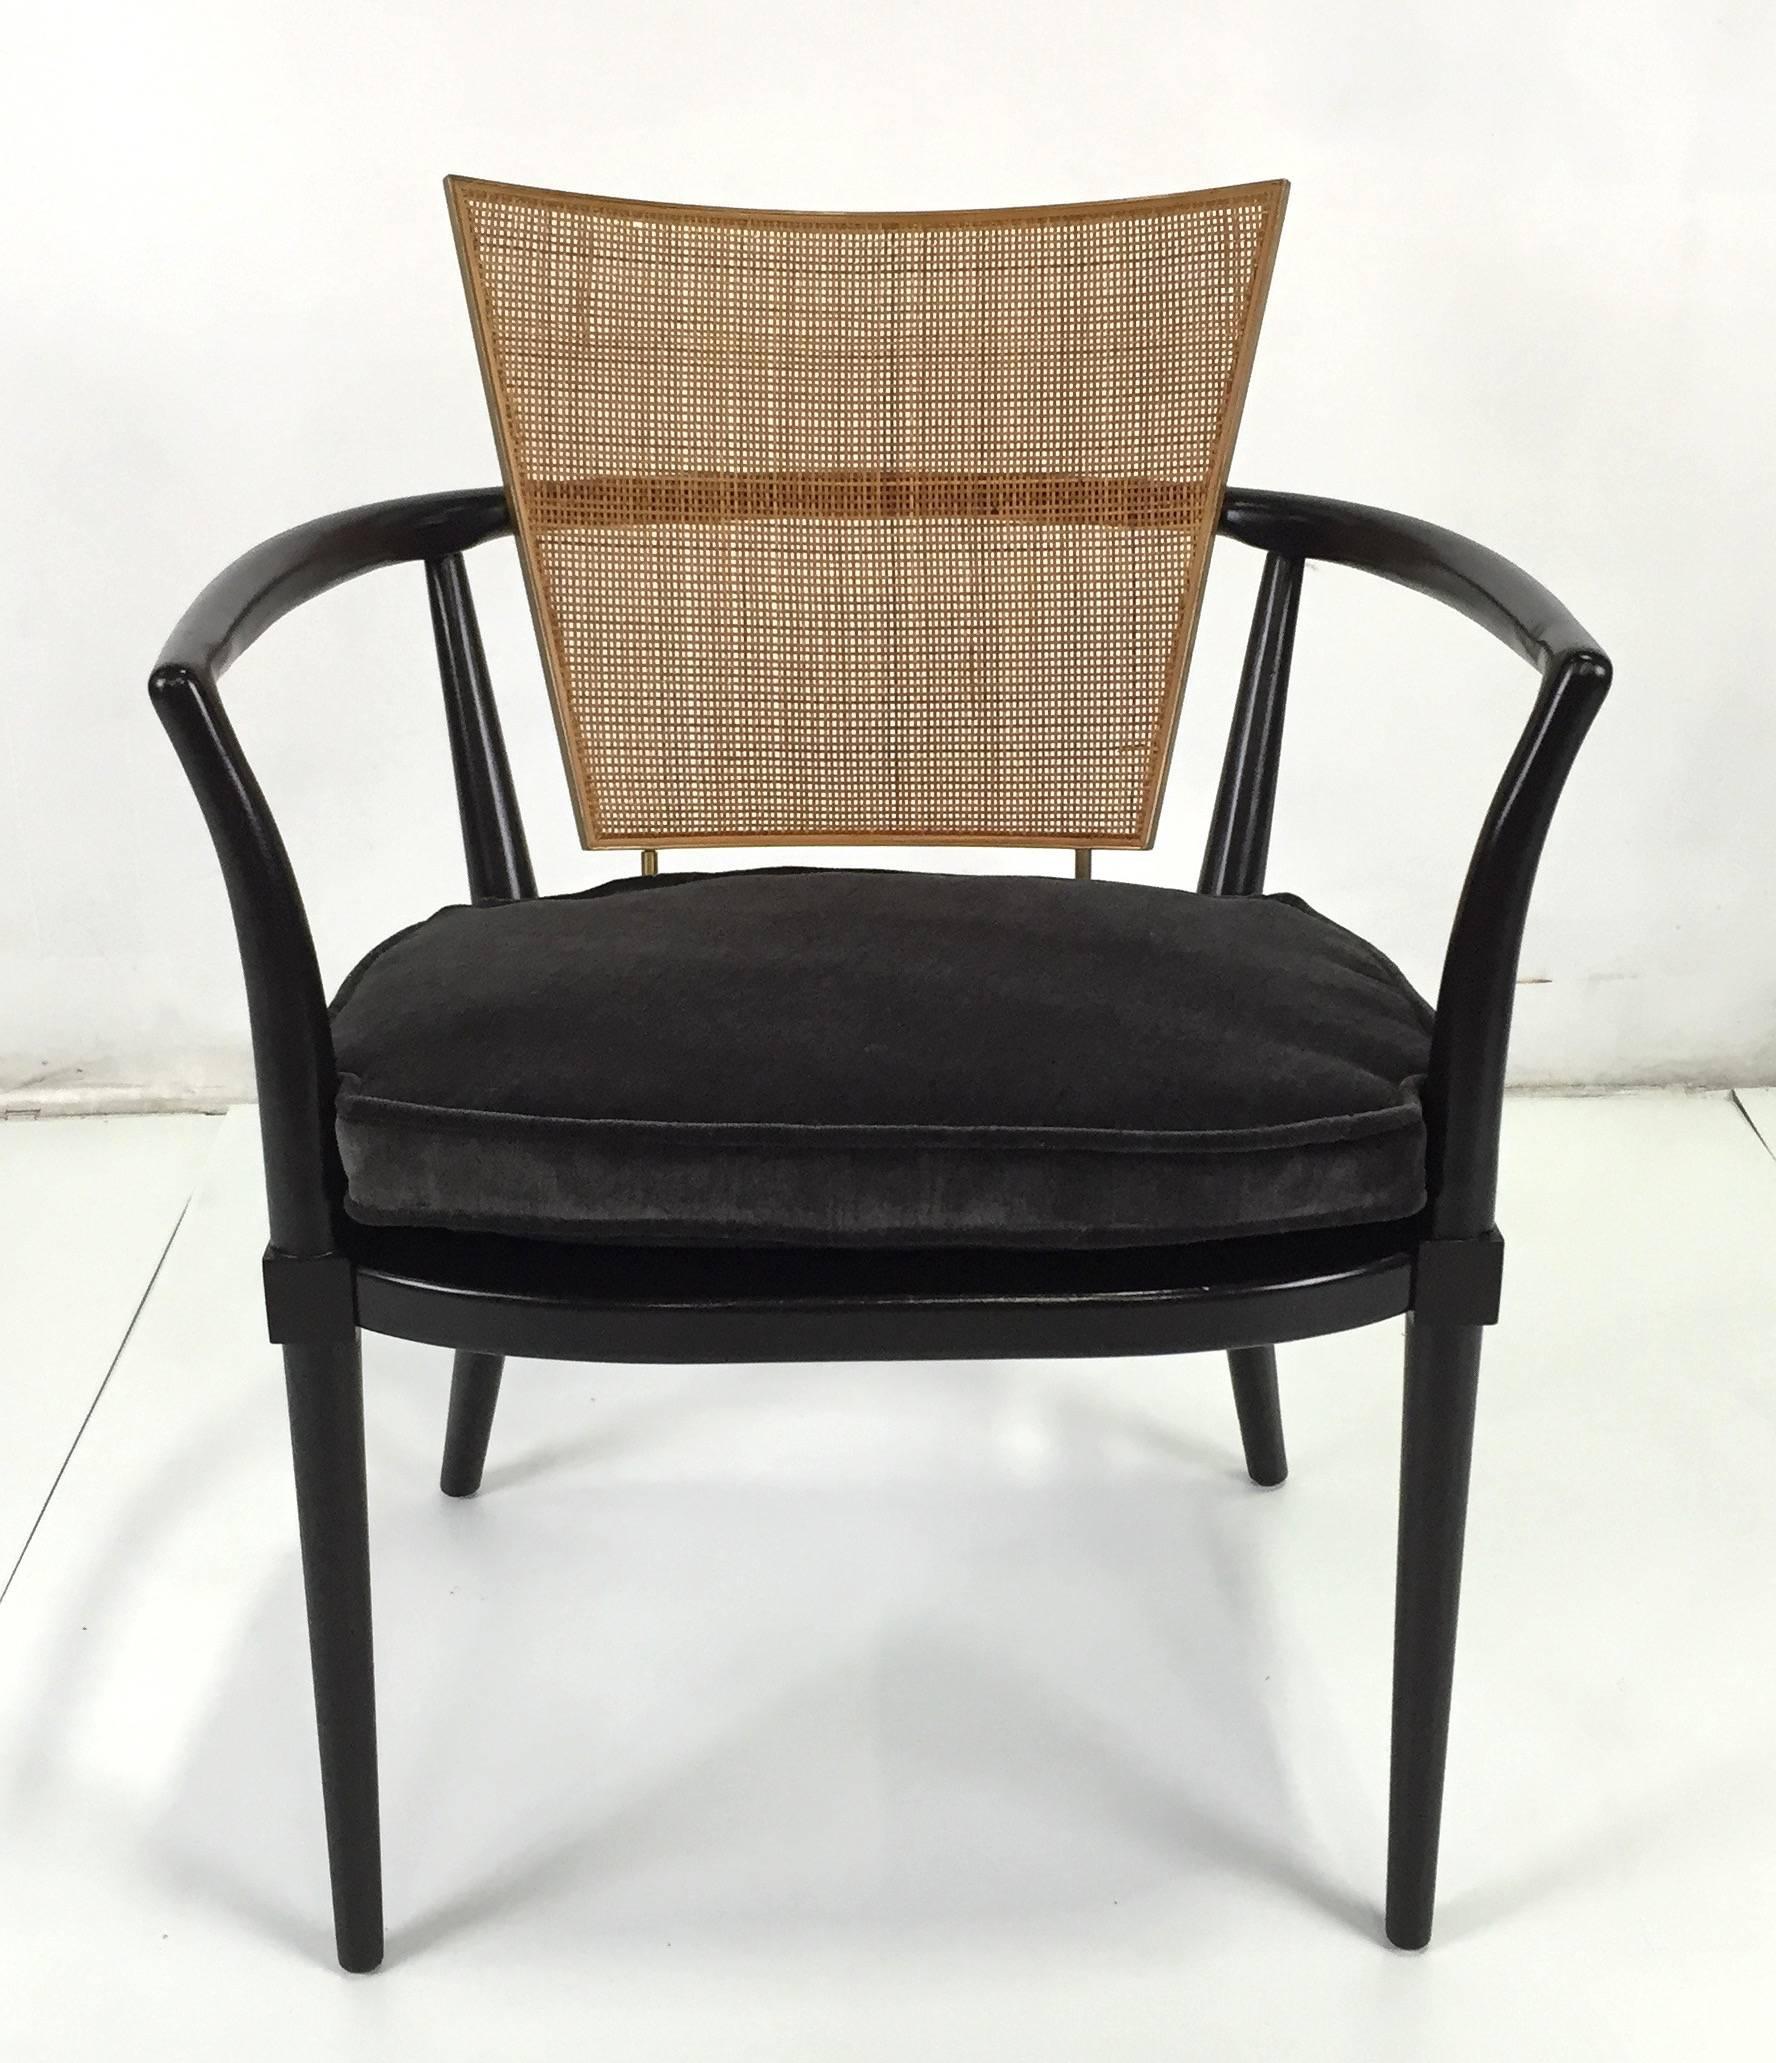 Fabulous pair of iconic armchairs by Bert England for Johnson Furniture. These beautifully crafted chairs that have been meticulously refinished to like-new condition. The seat cushions have been reupholstered with new foam and Dacron batting and